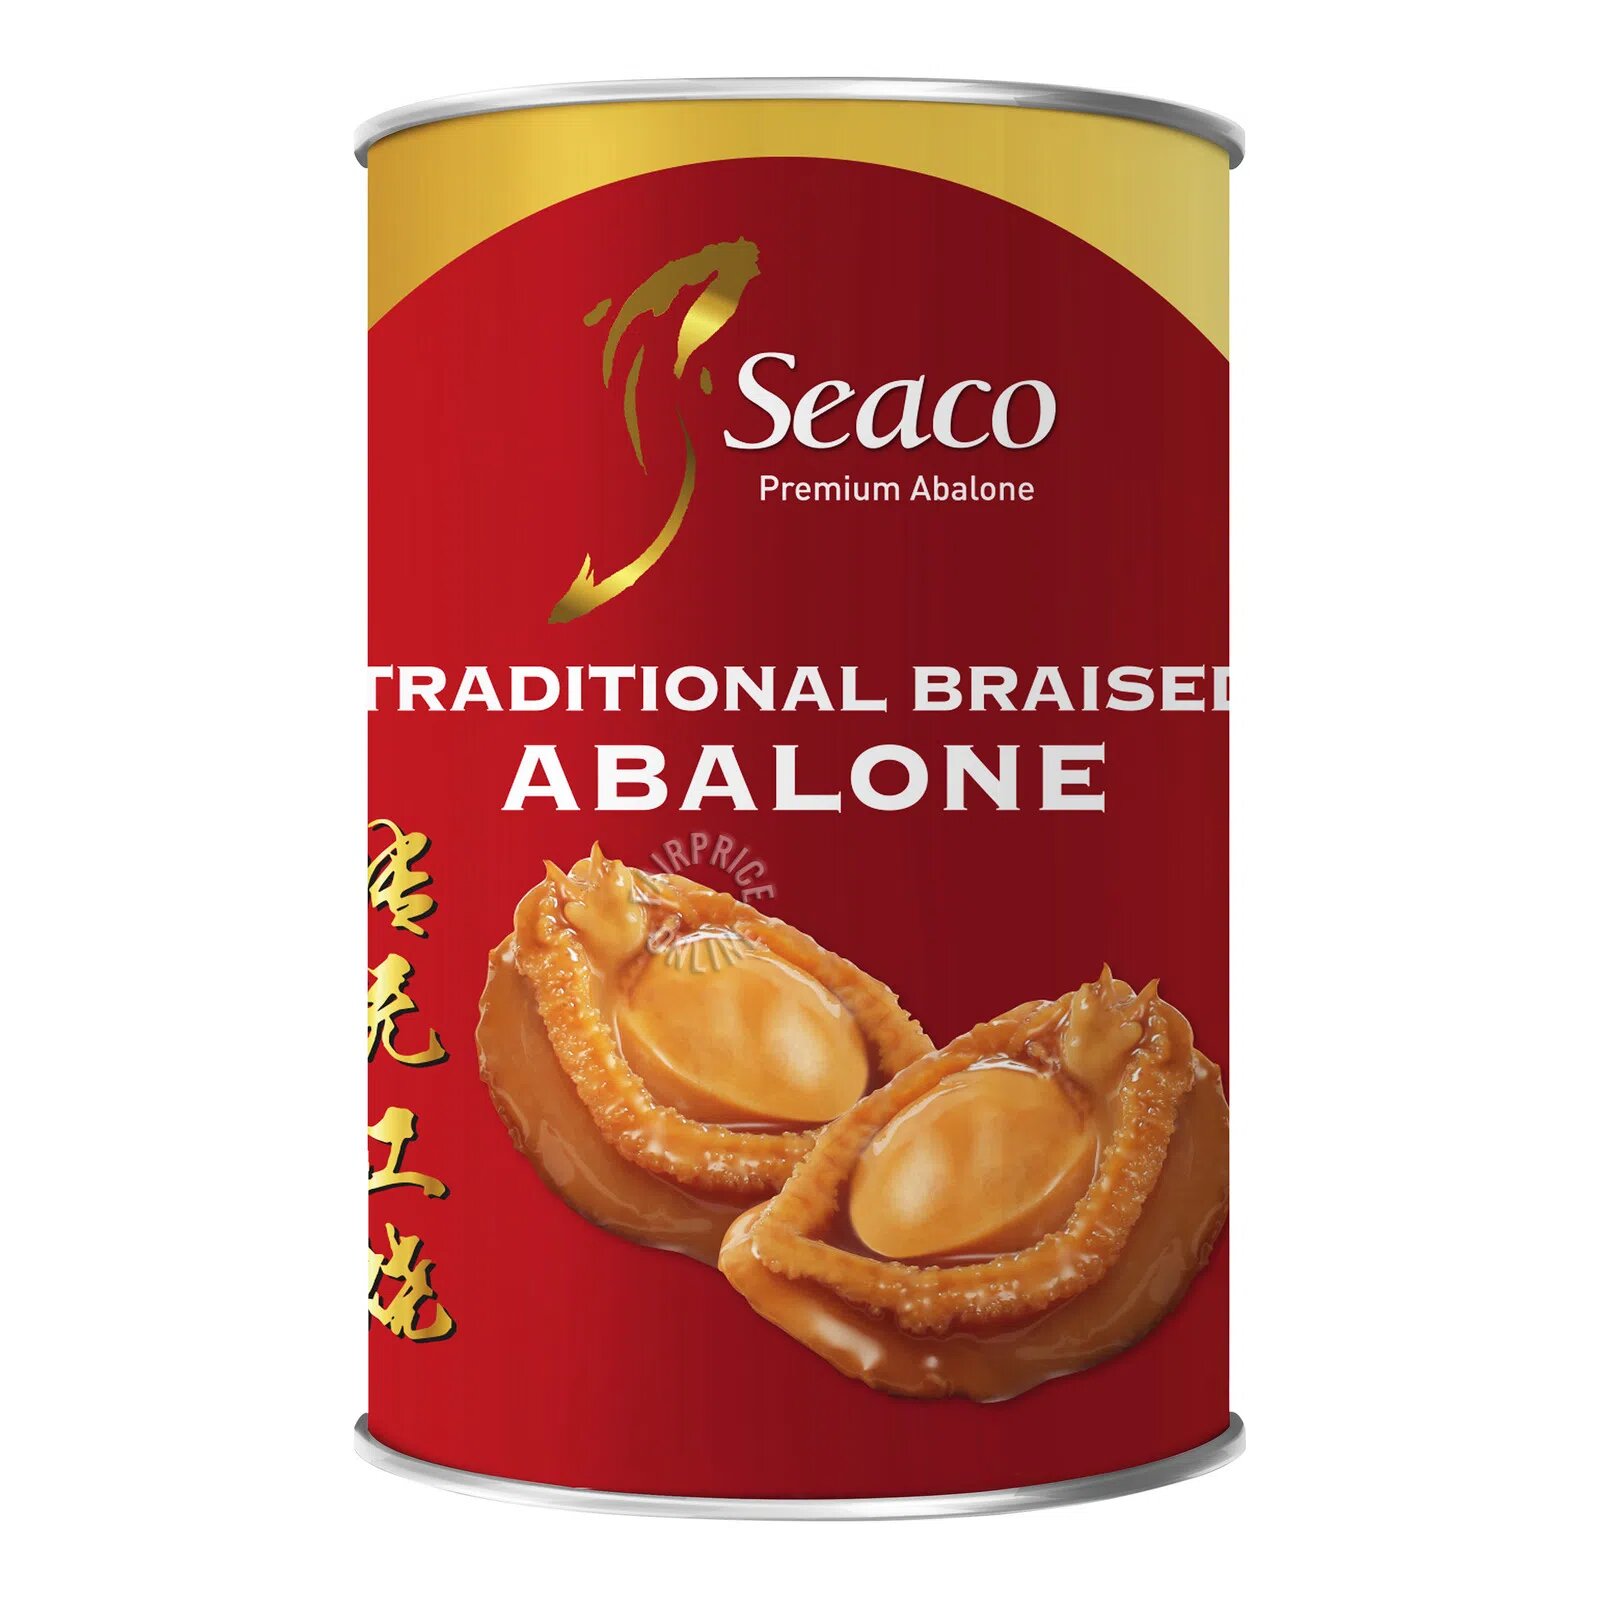 Seaco Abalone - Traditional Braised